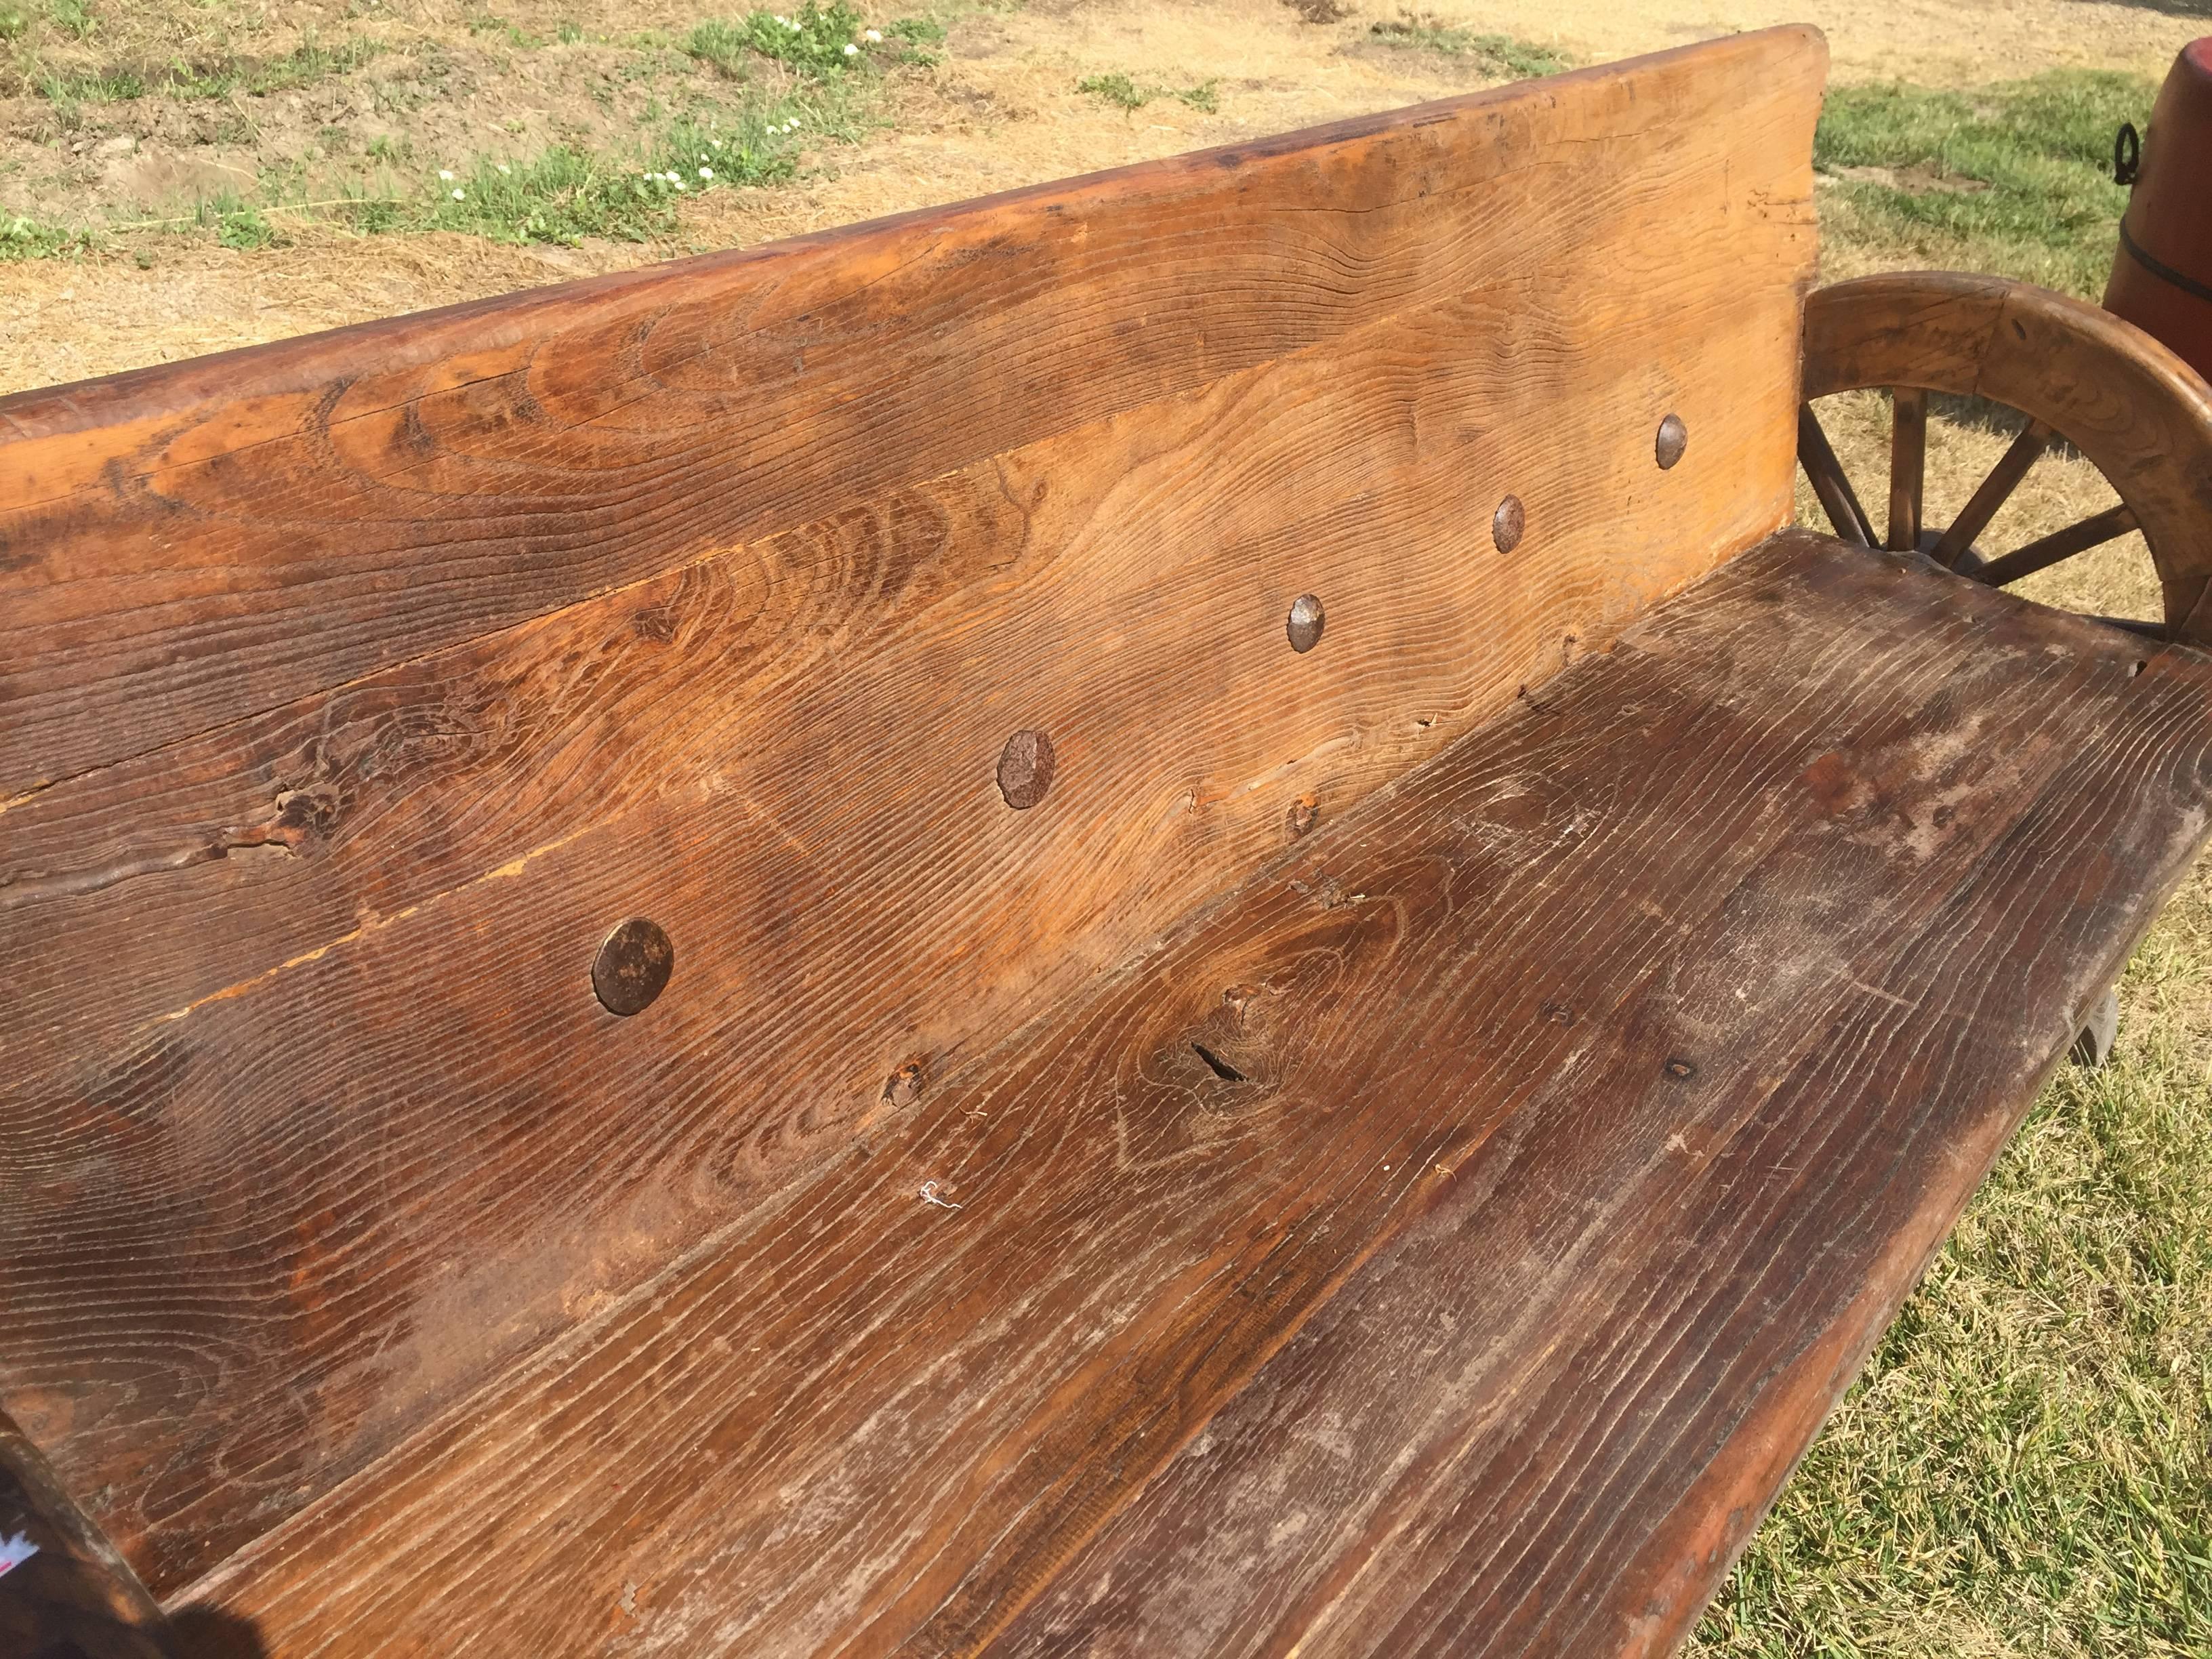 A substantial rustic bench.

This one of a kind bench is made of old jujube logs. Jujube, with its dense, heavy substance and beautiful, unique lumps and knots in appearance, is highly valued in northern China for making substantial furniture.